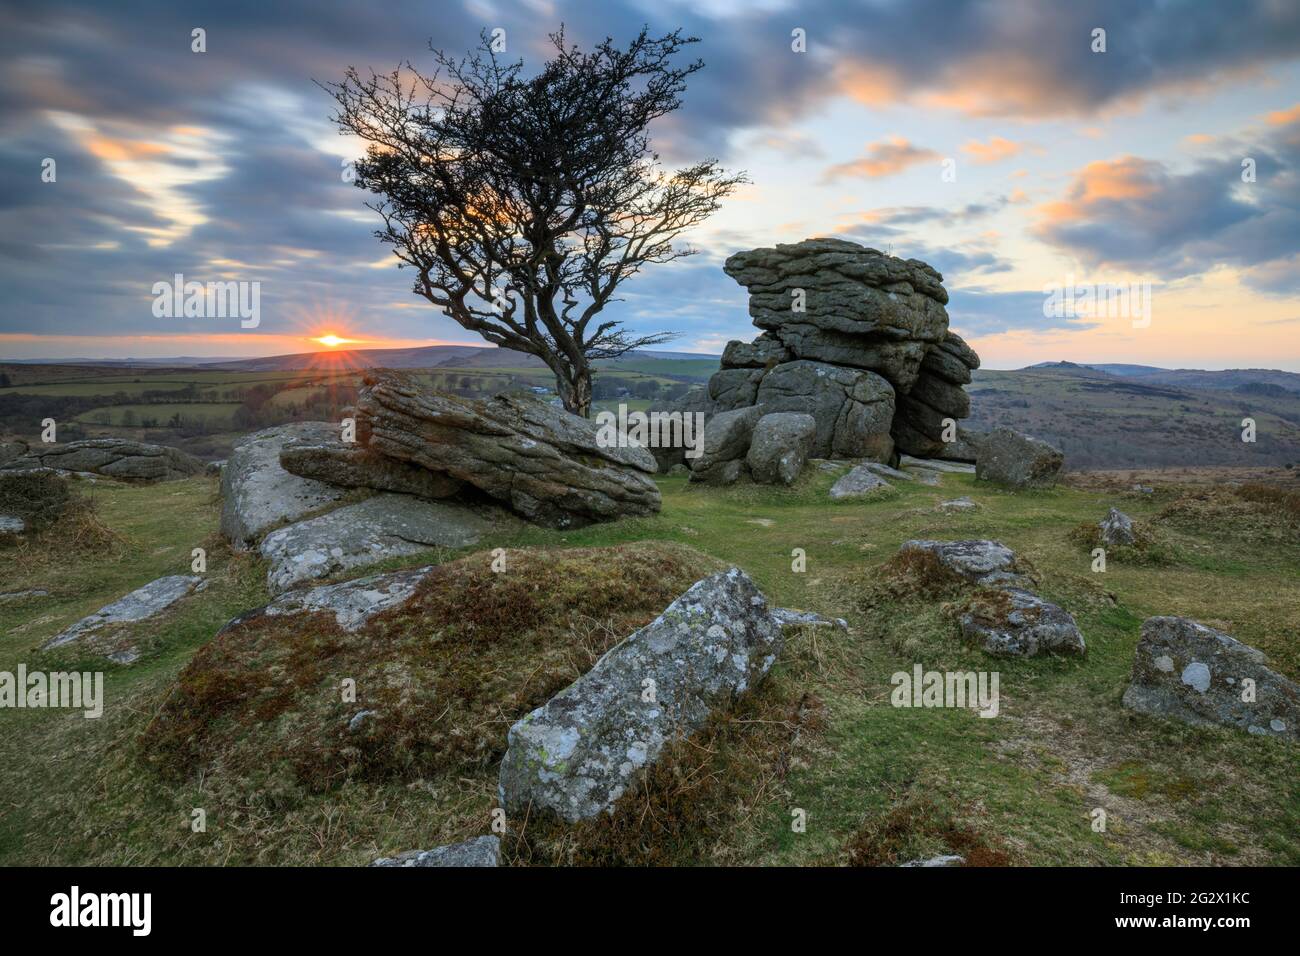 The photograph features the setting sun behind a lone hawthorn tree at Emsworthy Rocks, near Saddle Tor in the Dartmoor National Park in Devon. Stock Photo